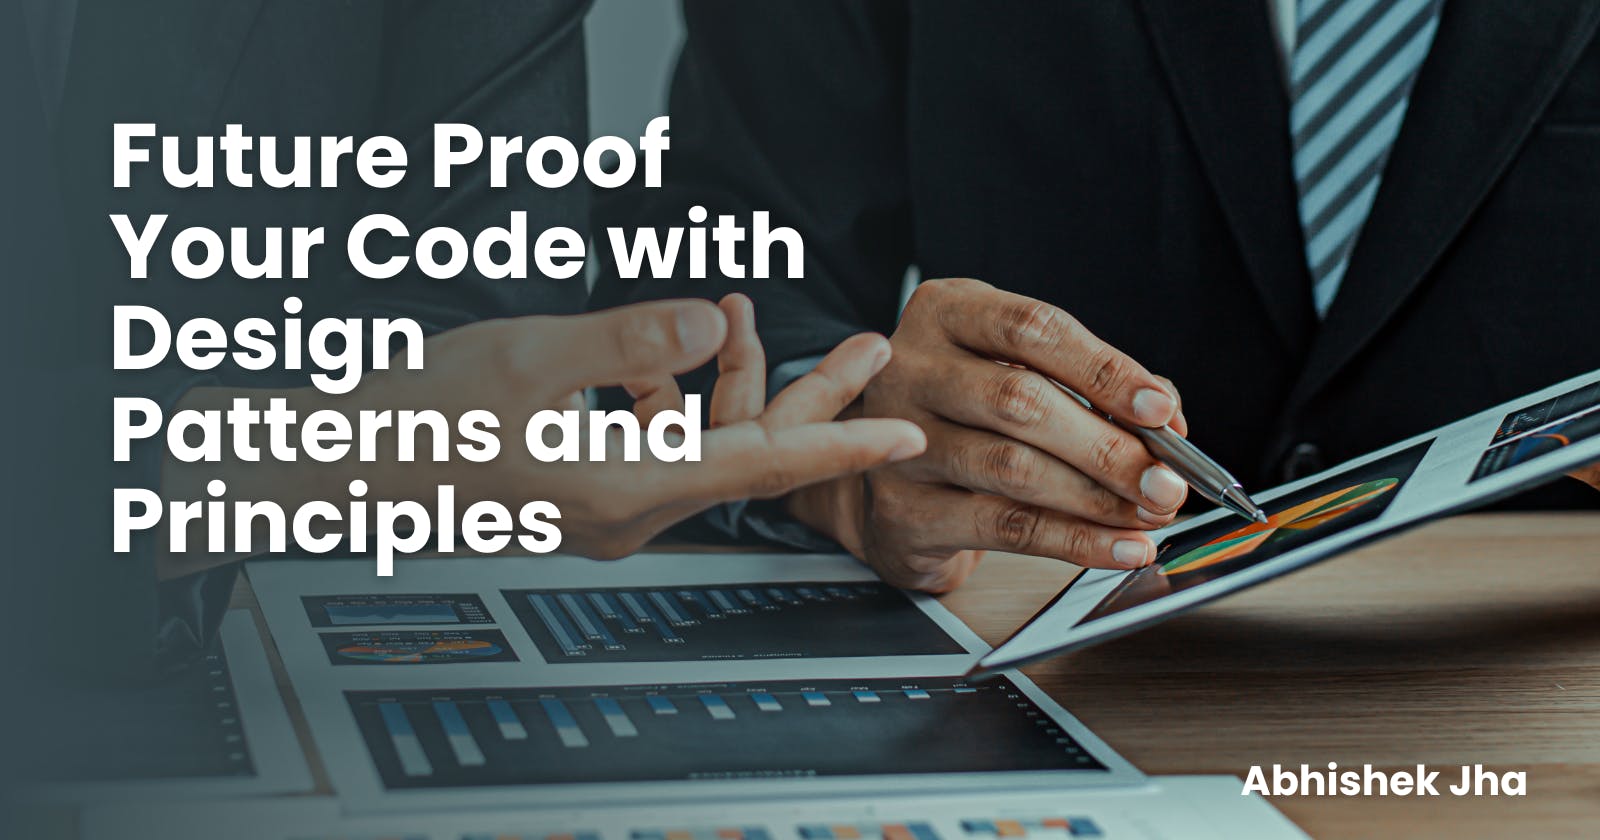 Future Proof Your Code with Design Patterns and Principles